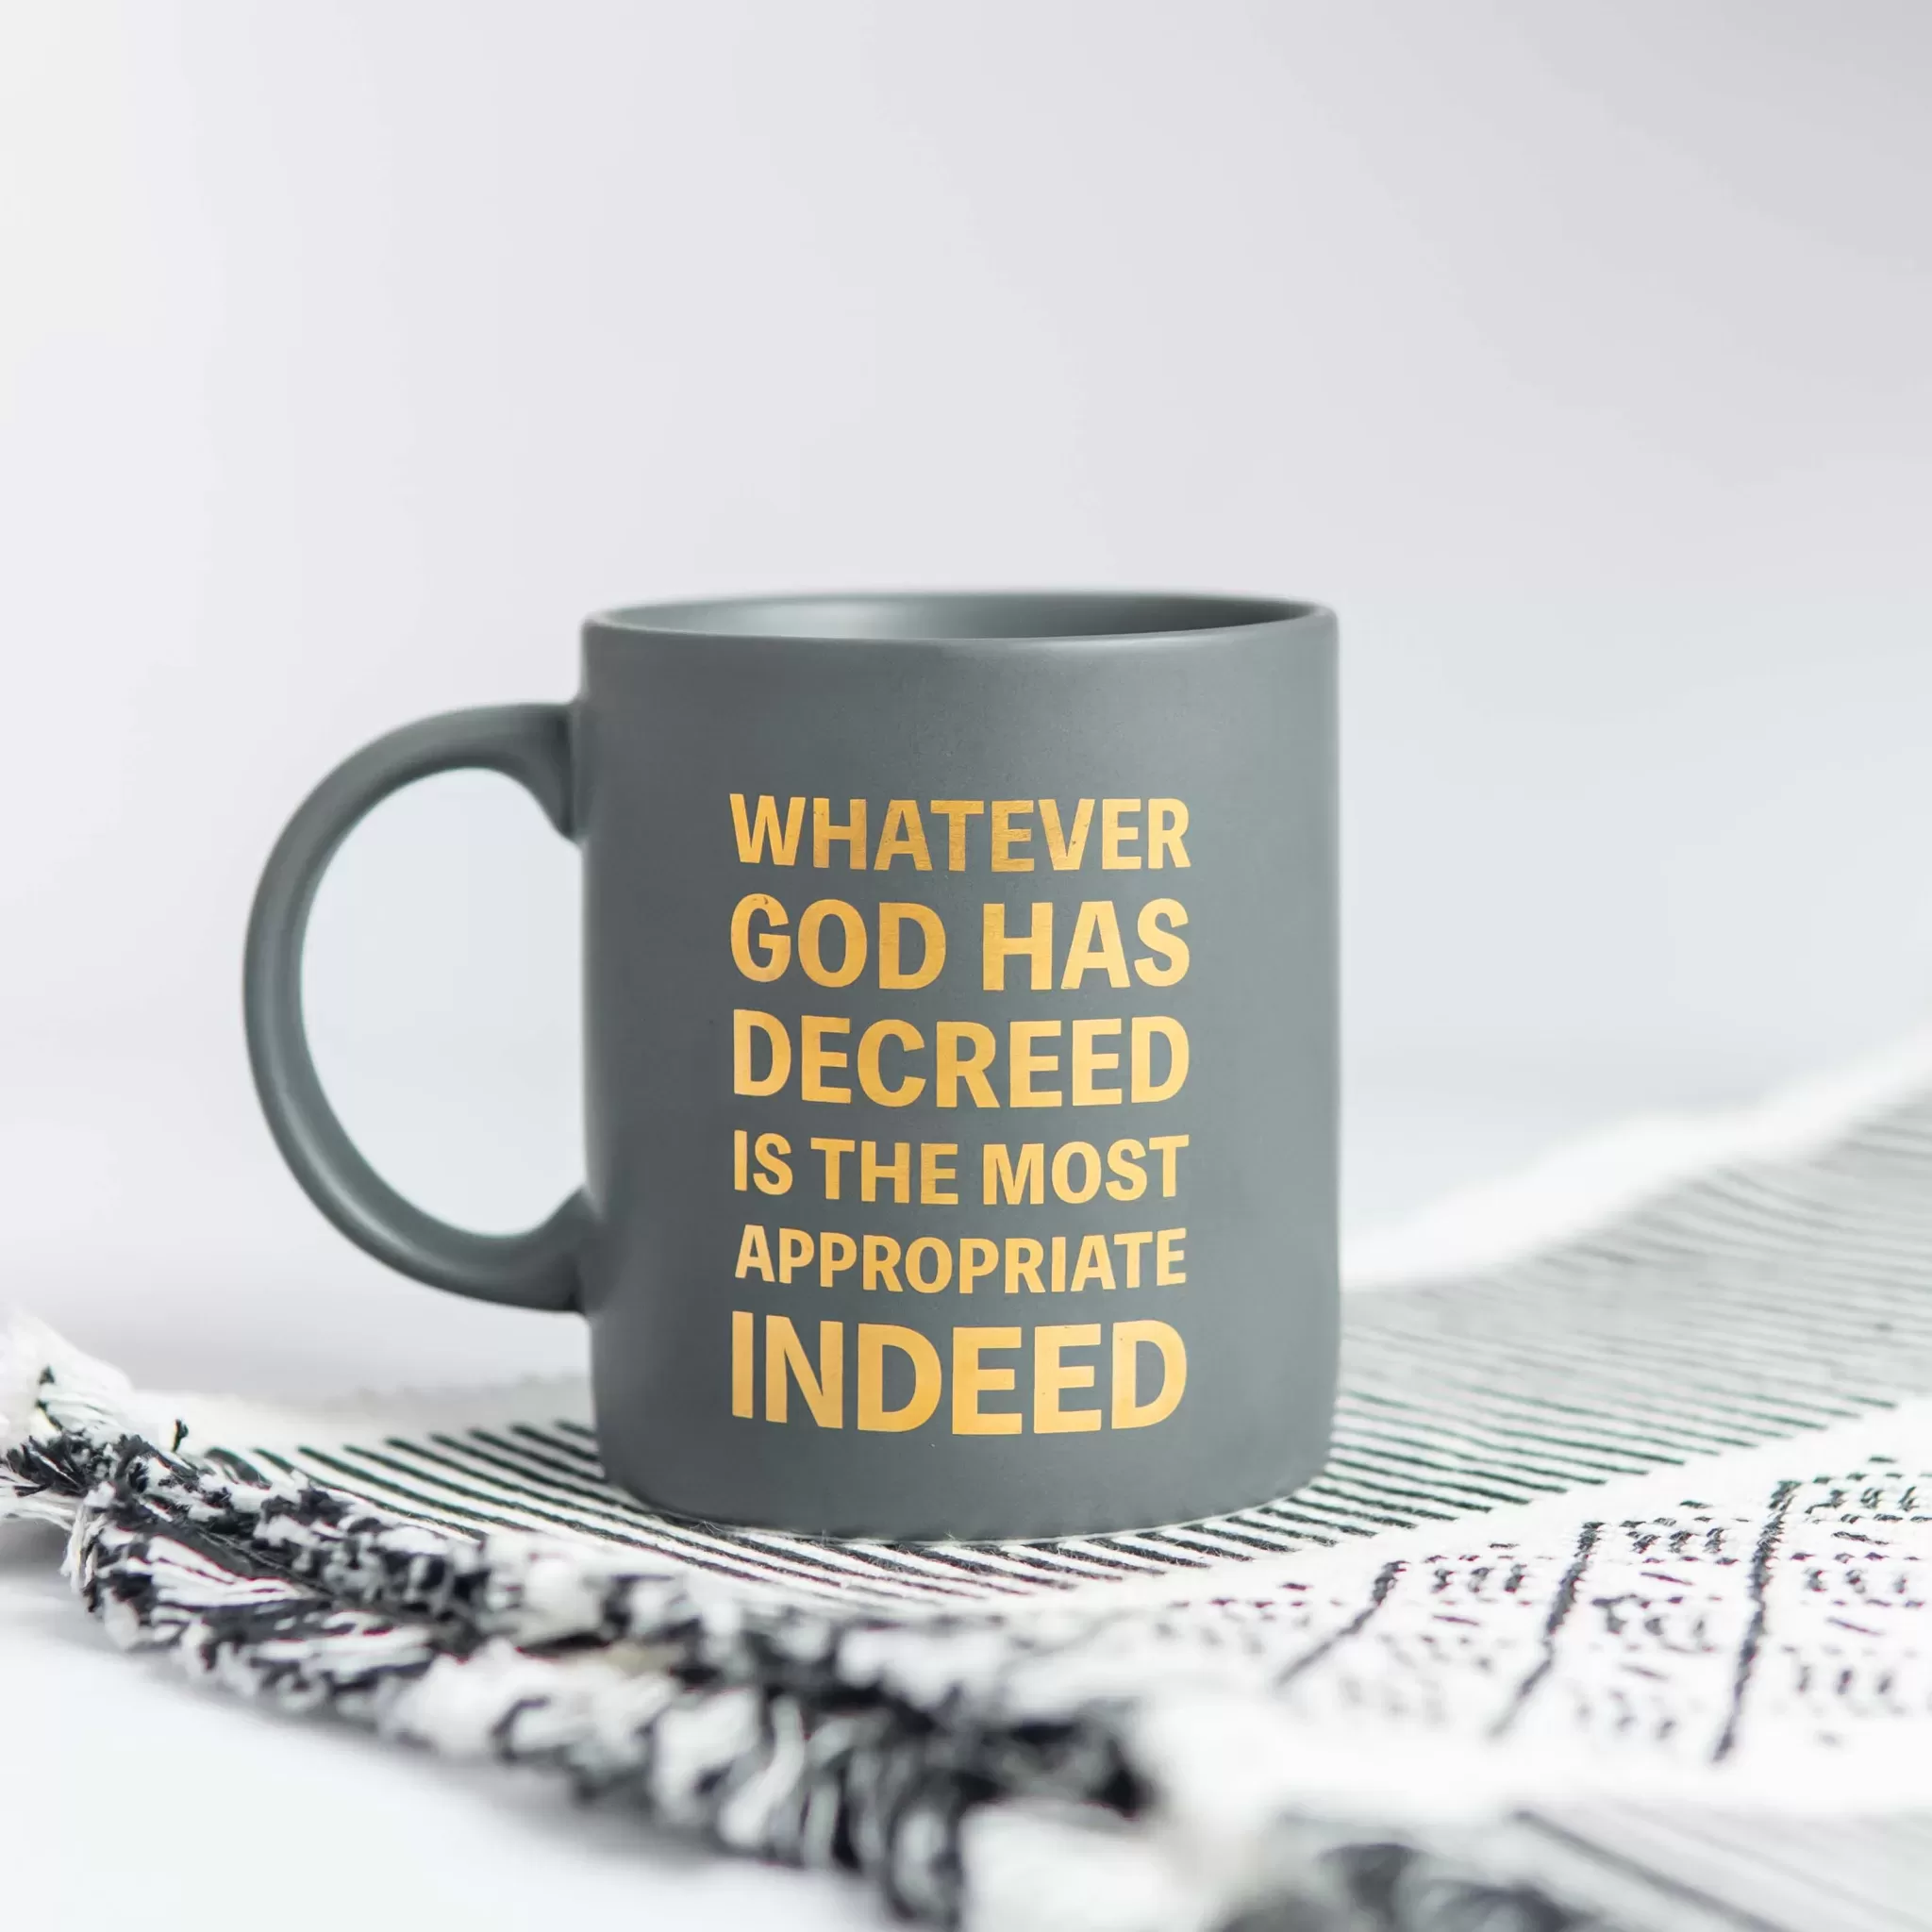 Whatever God Has Decreed is the Most Appropriate Indeed Mug